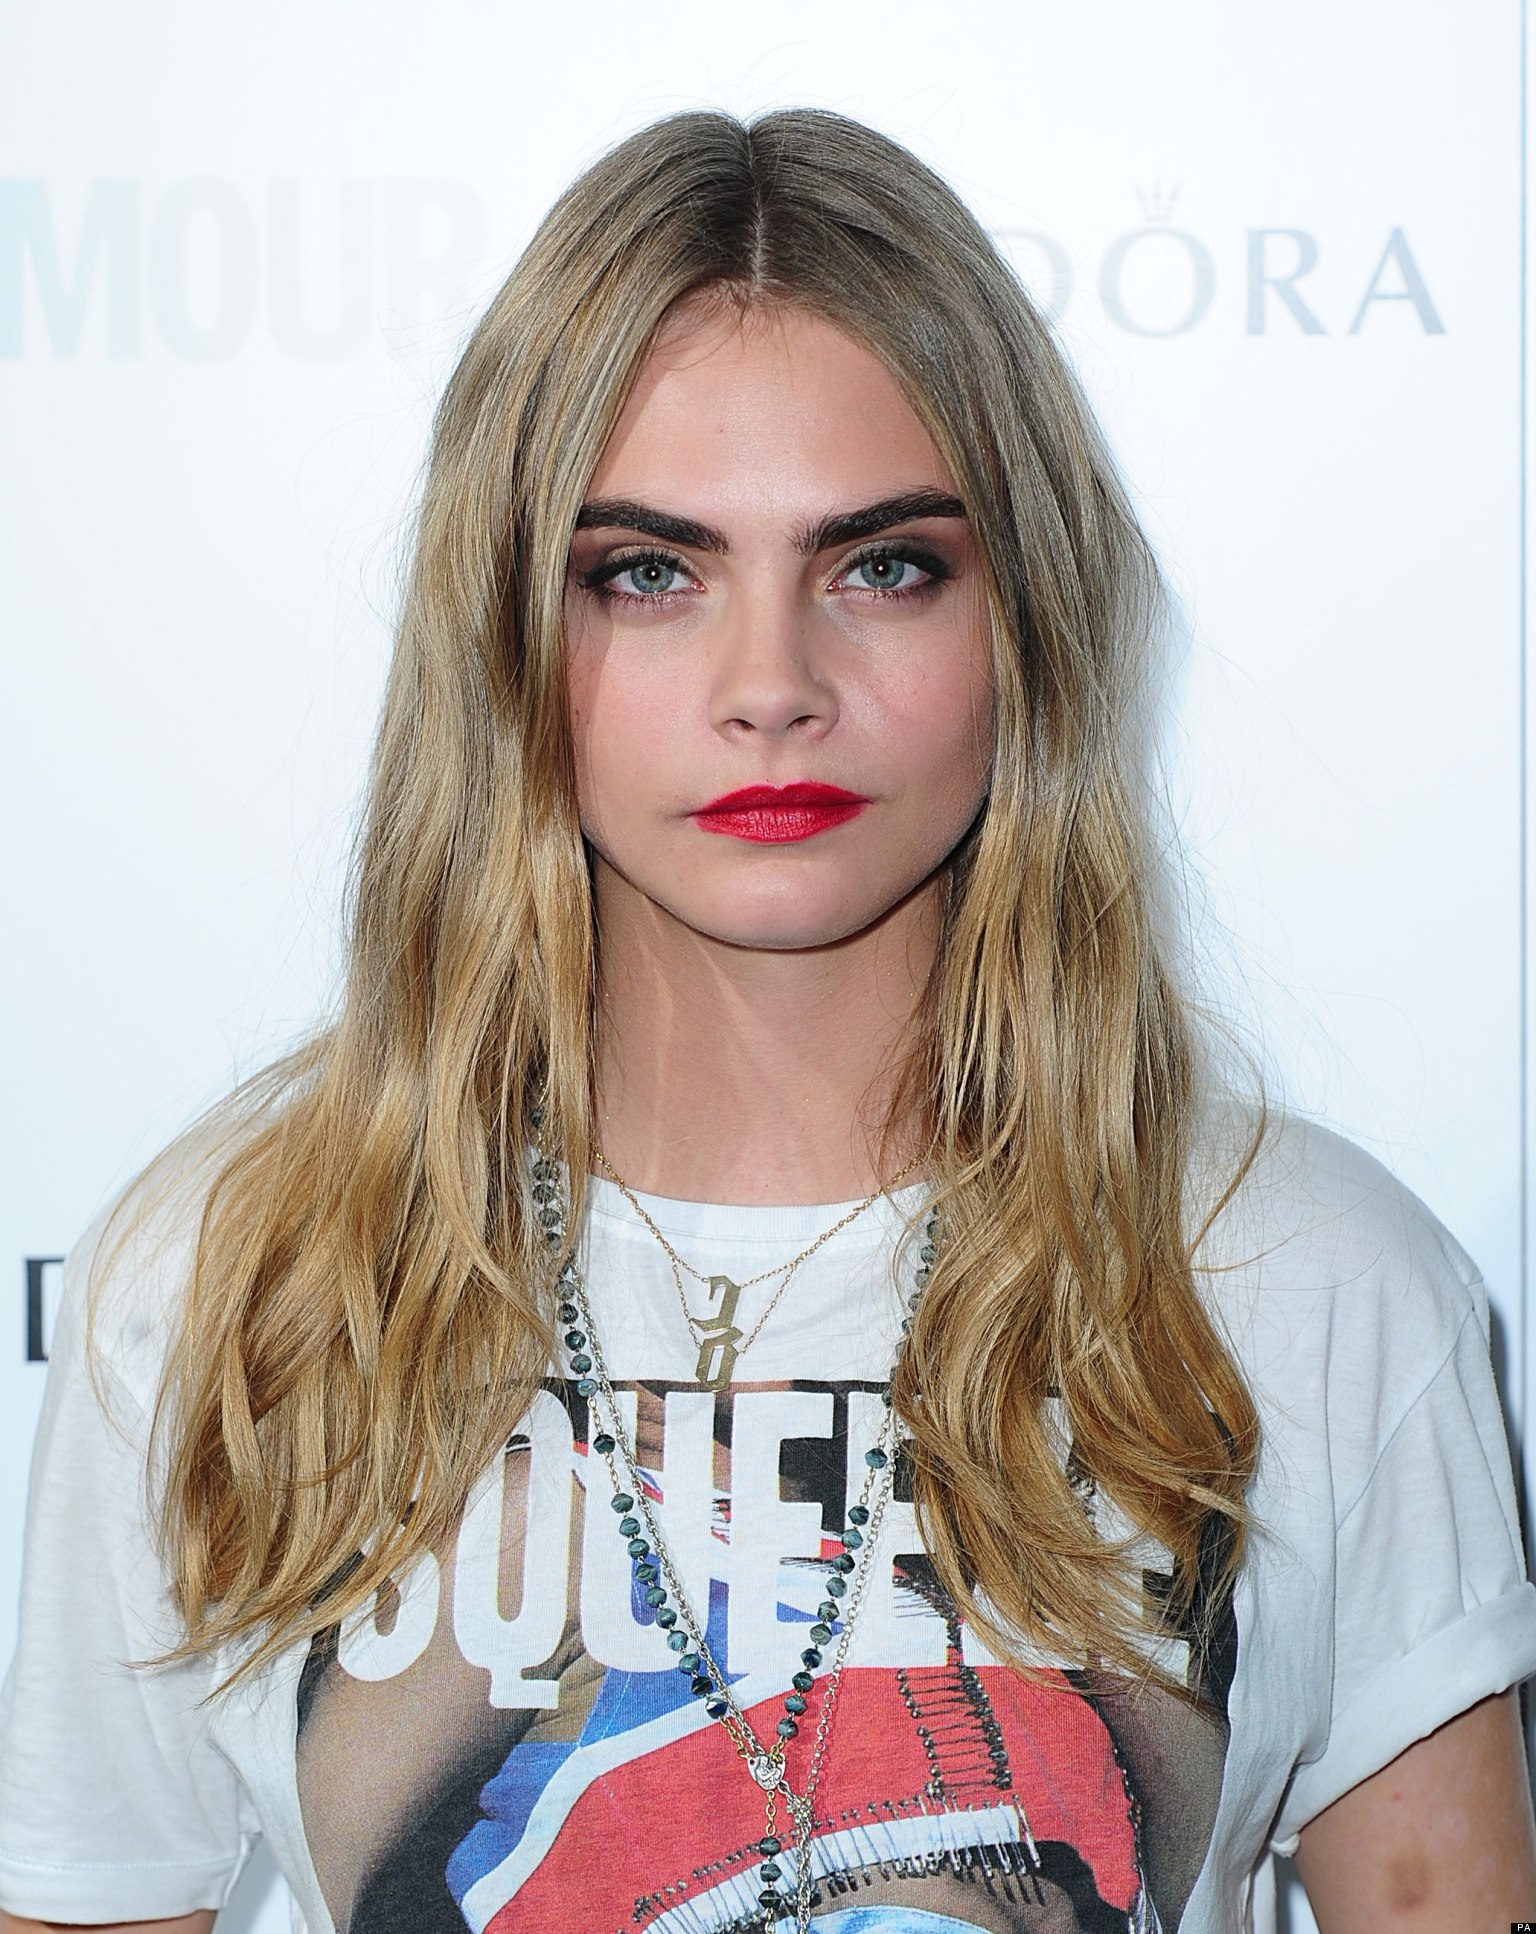 Cara Delevingne Flashes Nipple On Instagram (PICTURE) | HuffPost UK